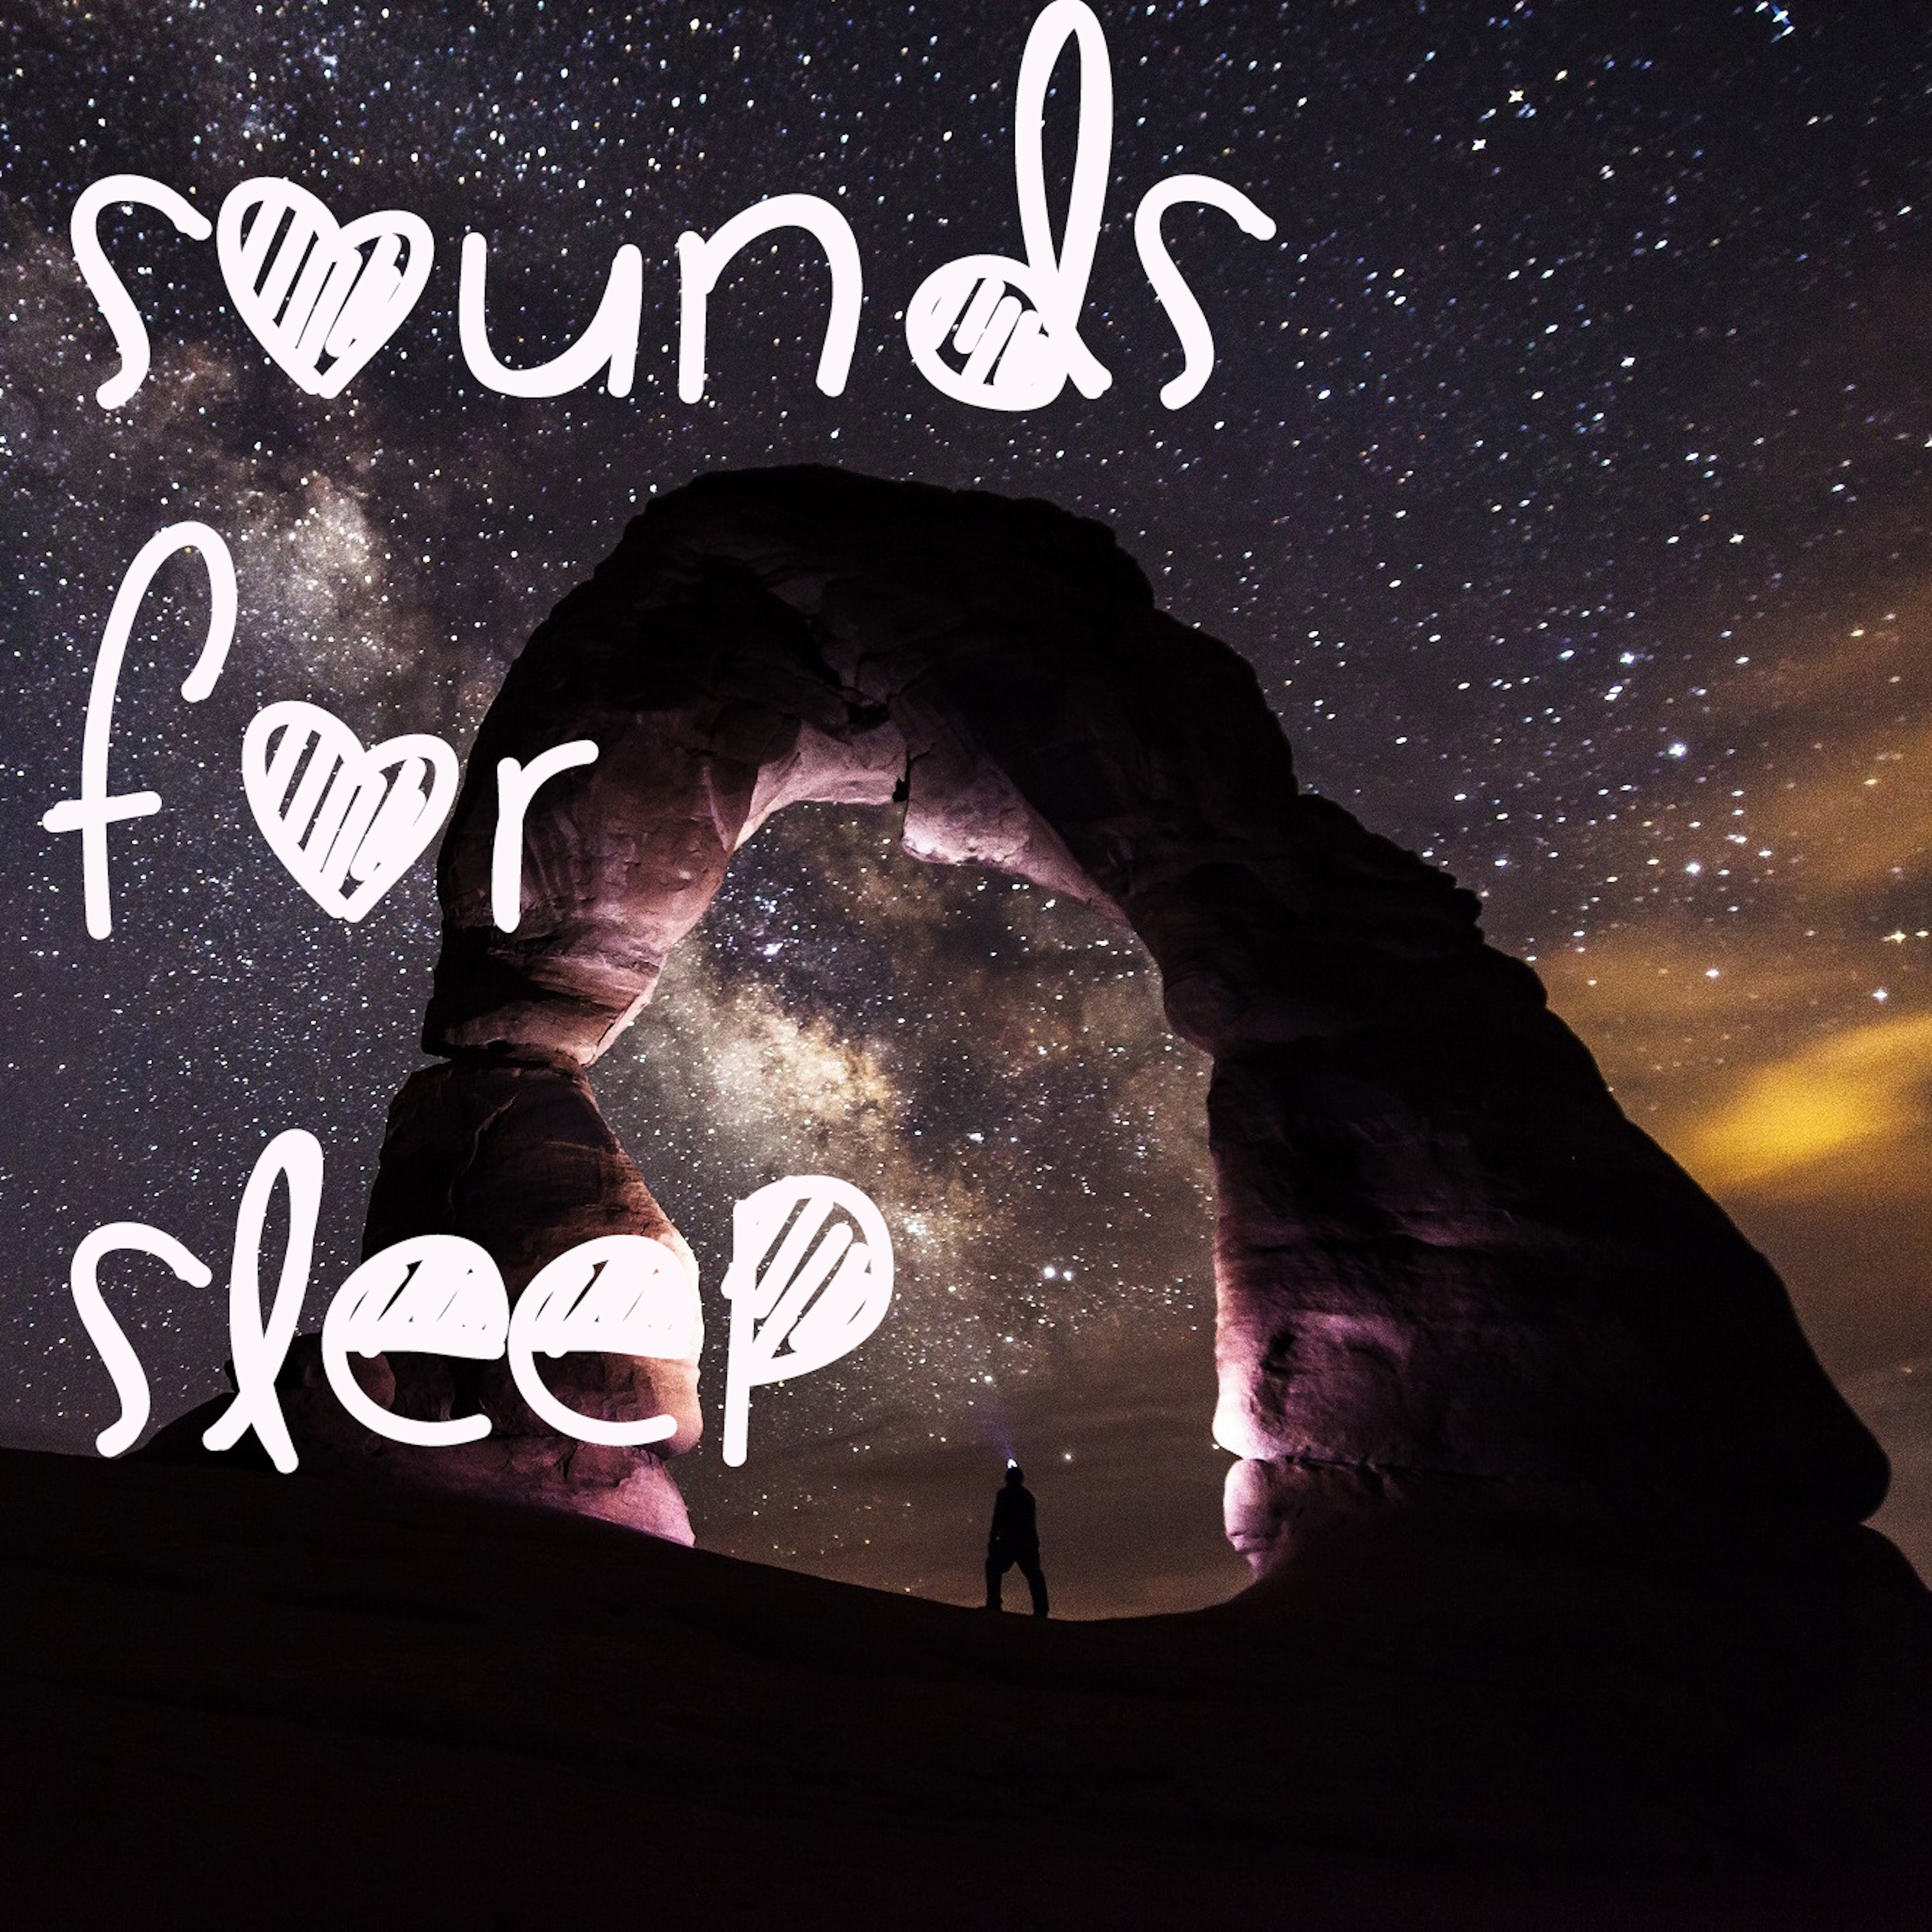 16 Sounds to Fall Asleep Quickly and Sleep all Night